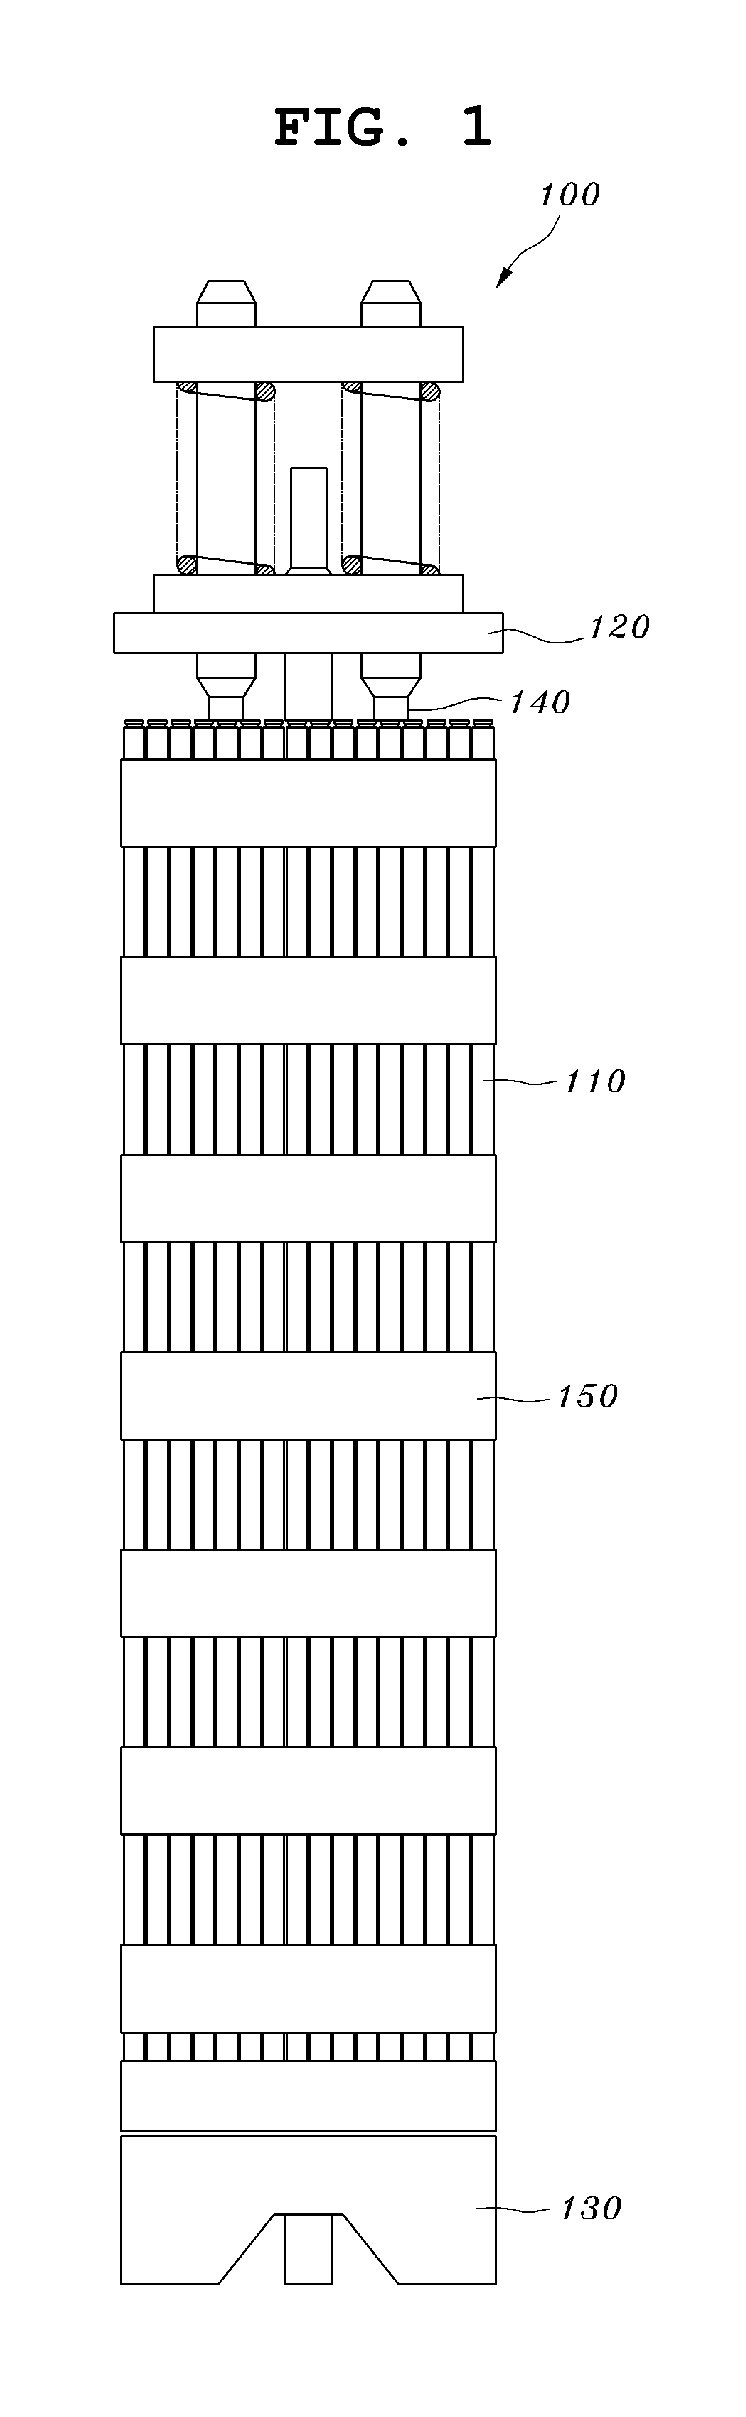 Spacer grid for dual-cooling nuclear fuel rods using intersectional support structures